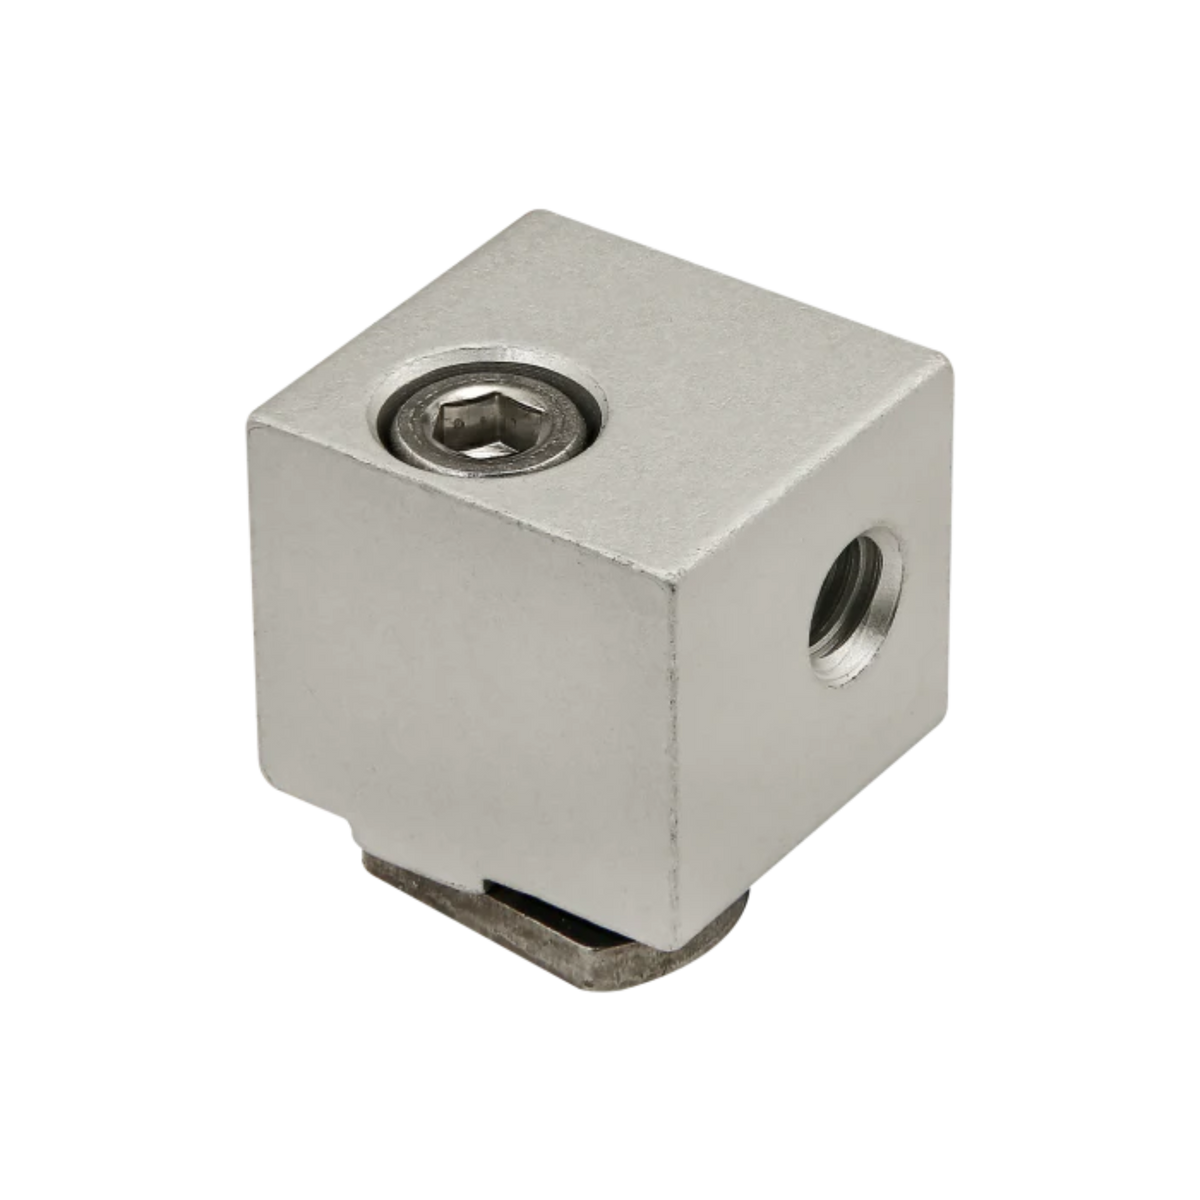 aluminum square block with a hexhead screw on the top left and a port on the right side